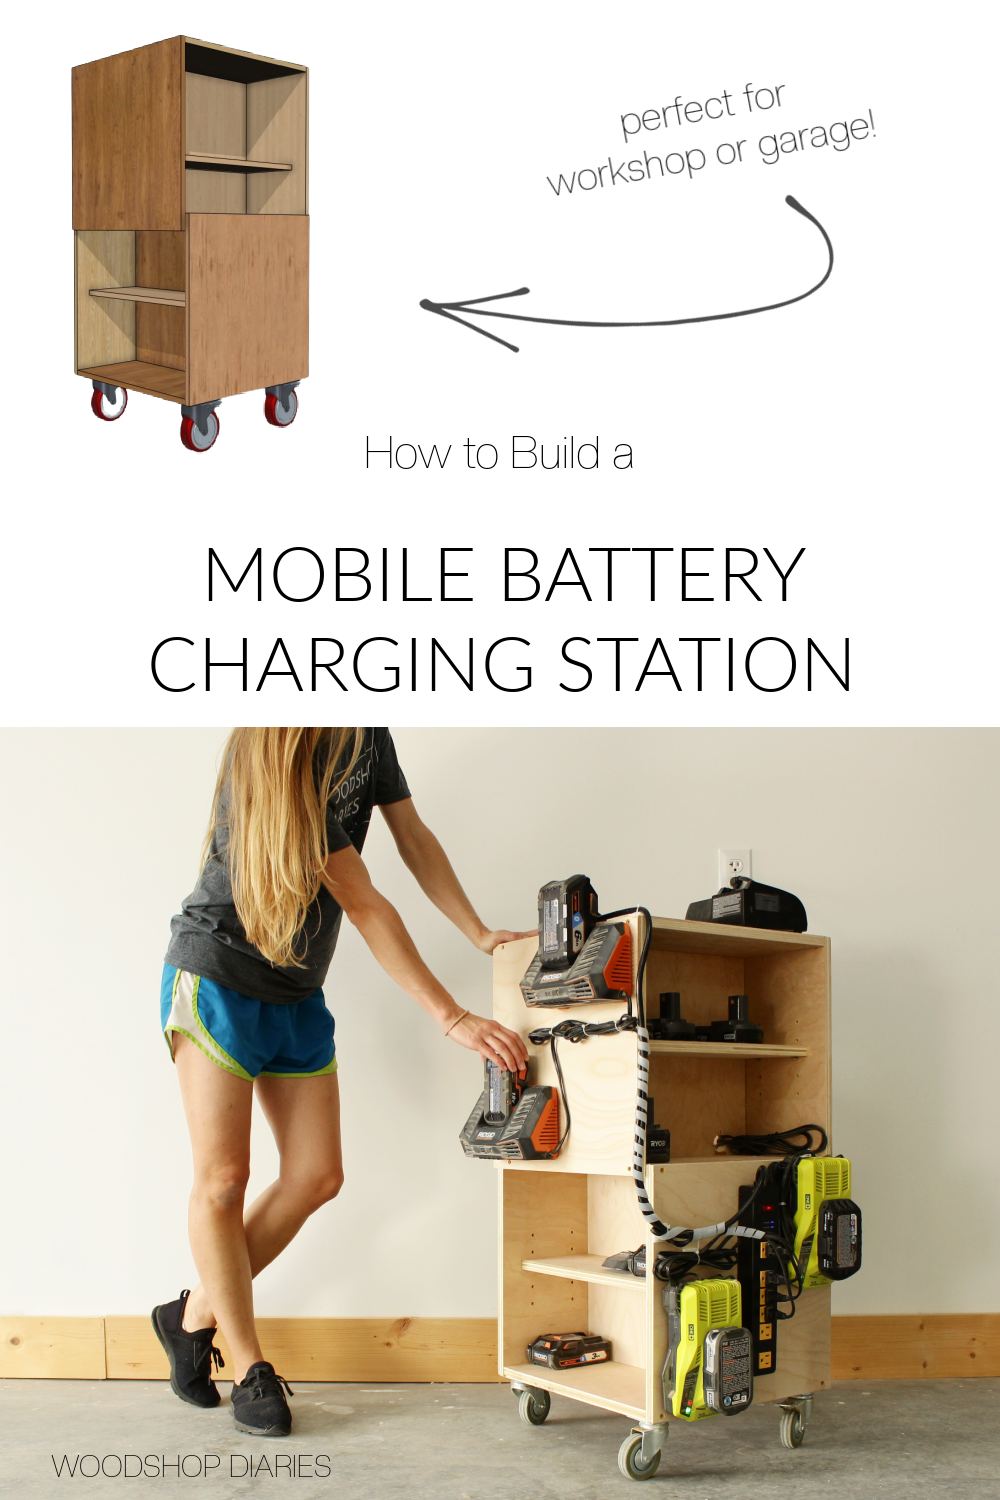 Pin image collage showing overall diagram at top and Shara Woodshop Diaries putting a battery on the charger at bottom with text "How to build a mobile battery charging station"